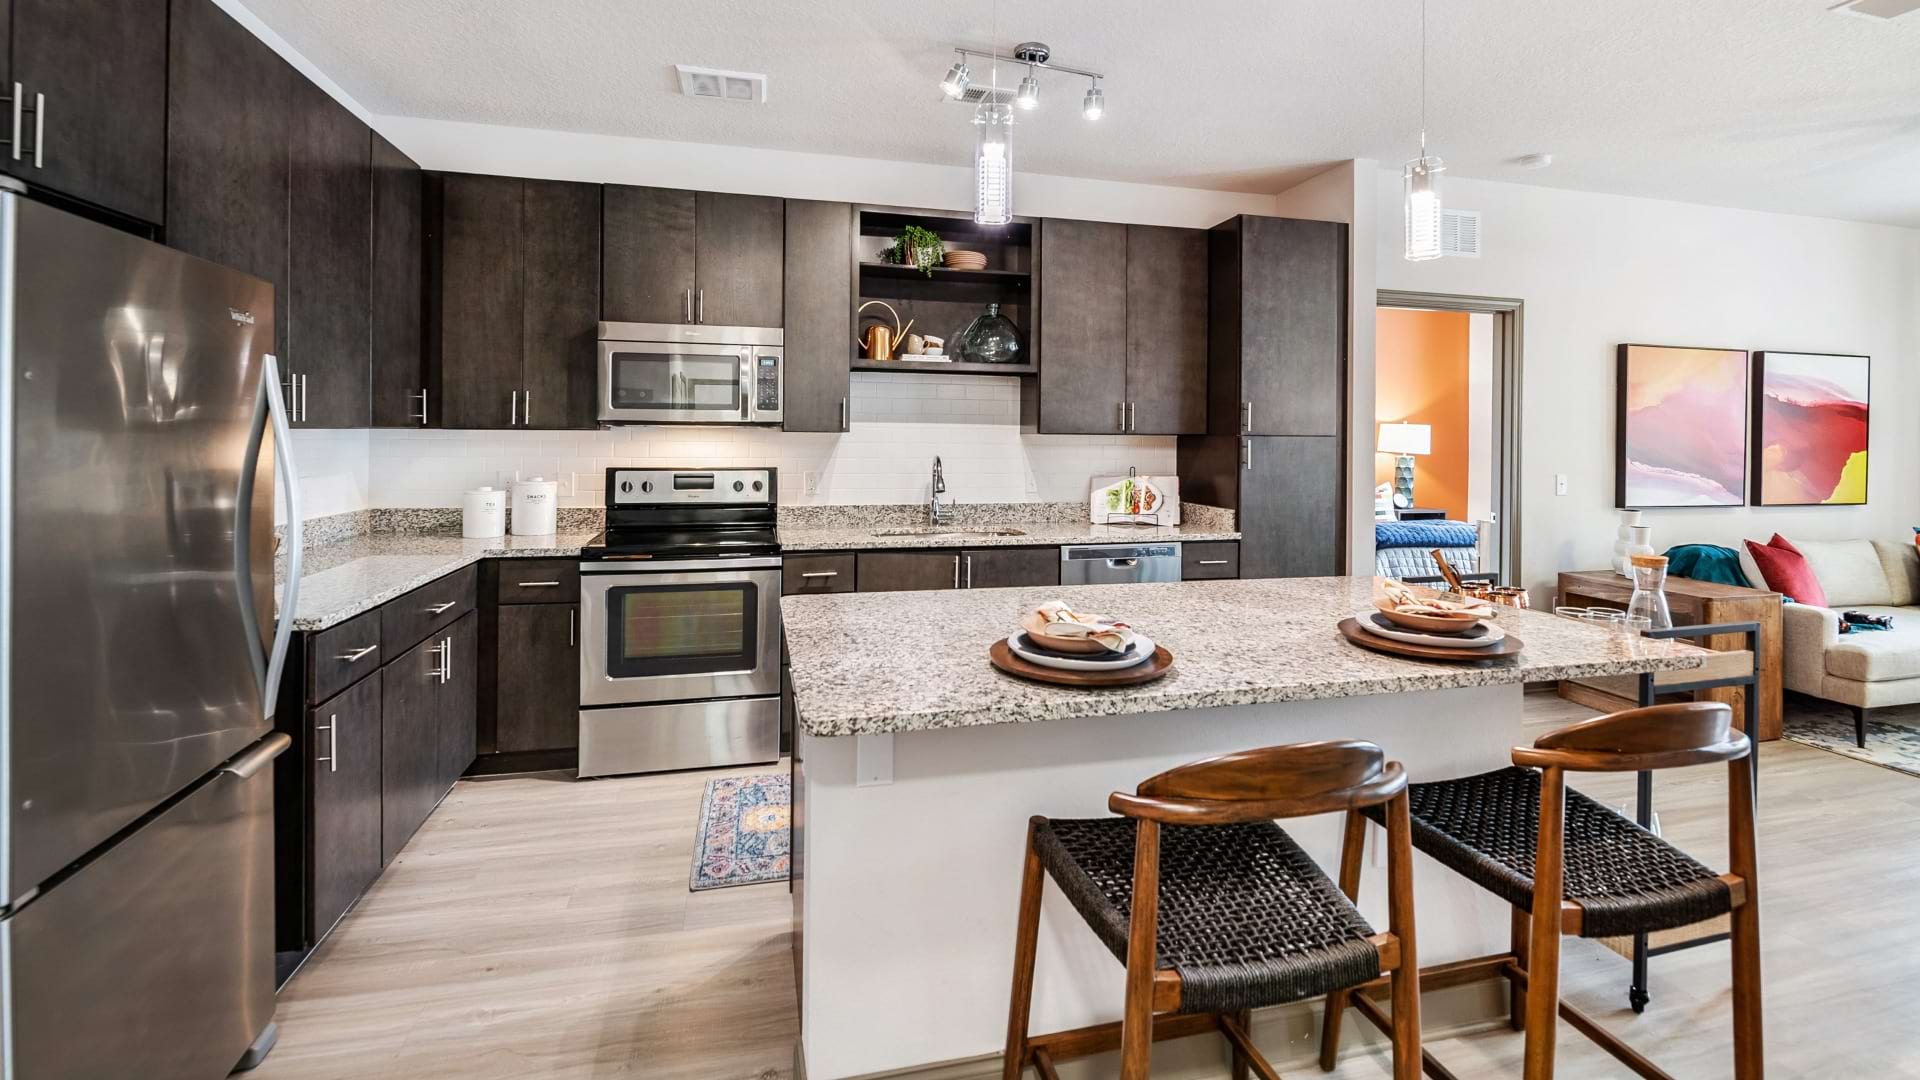 Spacious, Upscale Kitchen With Large Granite Island At Our Apartments In Hunter's Creek, FL